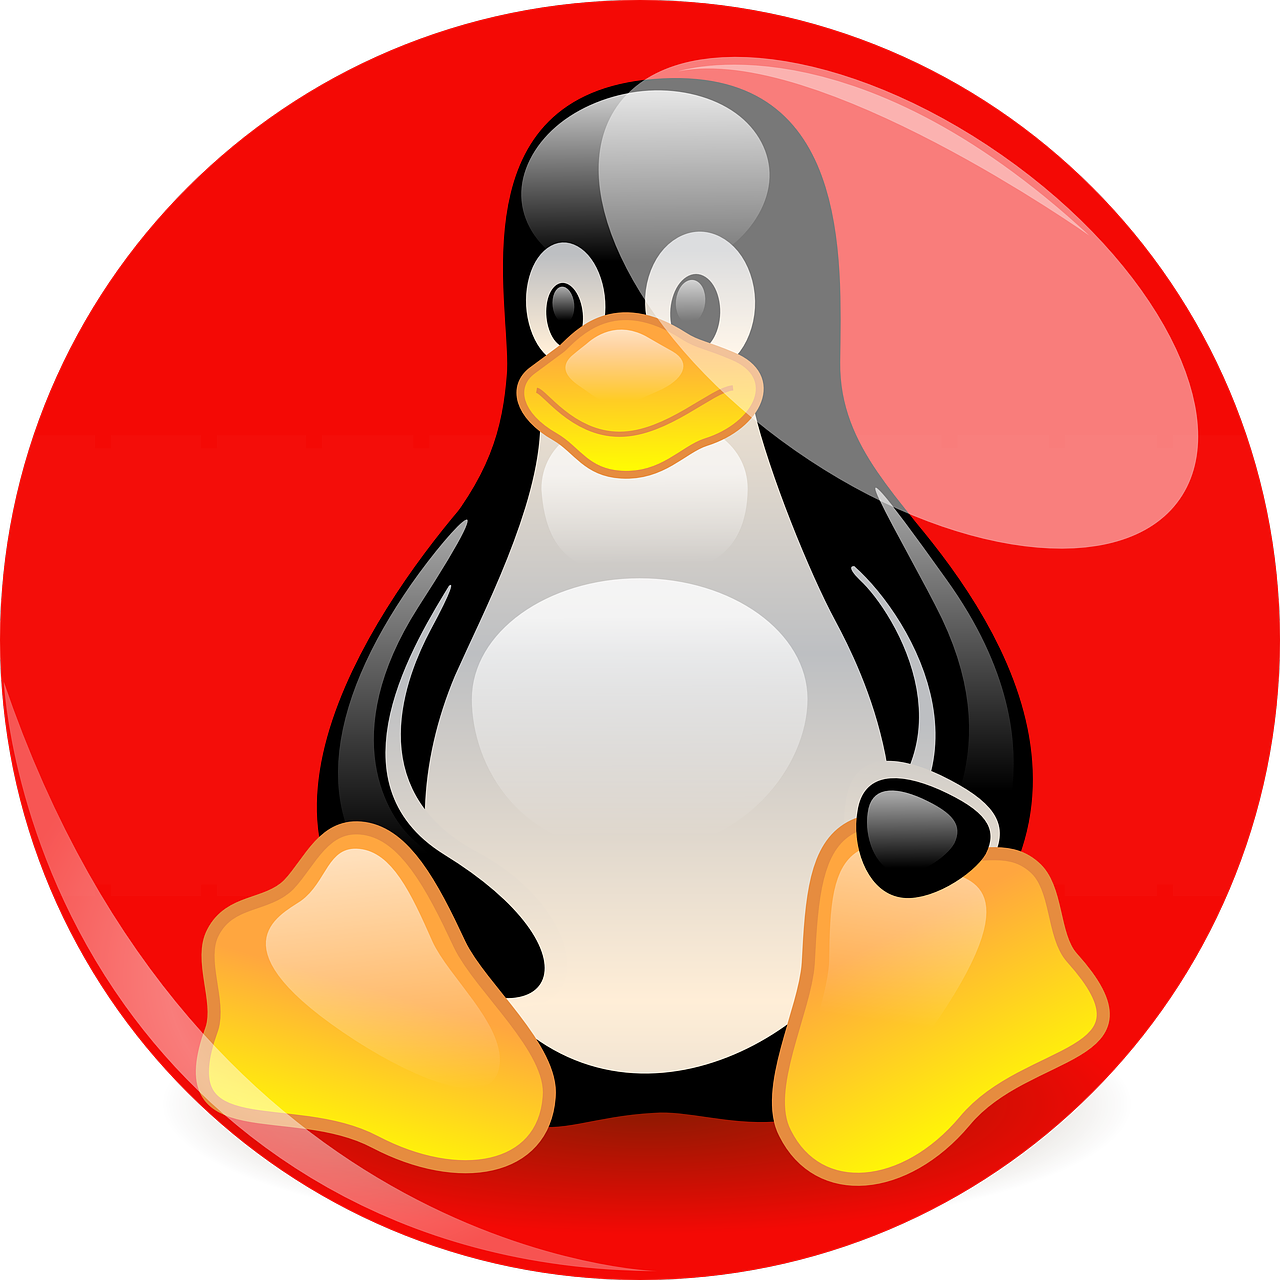 penguin,linux,mascot,cartoon character,figure,red,drawing,free pictures, free photos, free images, royalty free, free illustrations, public domain